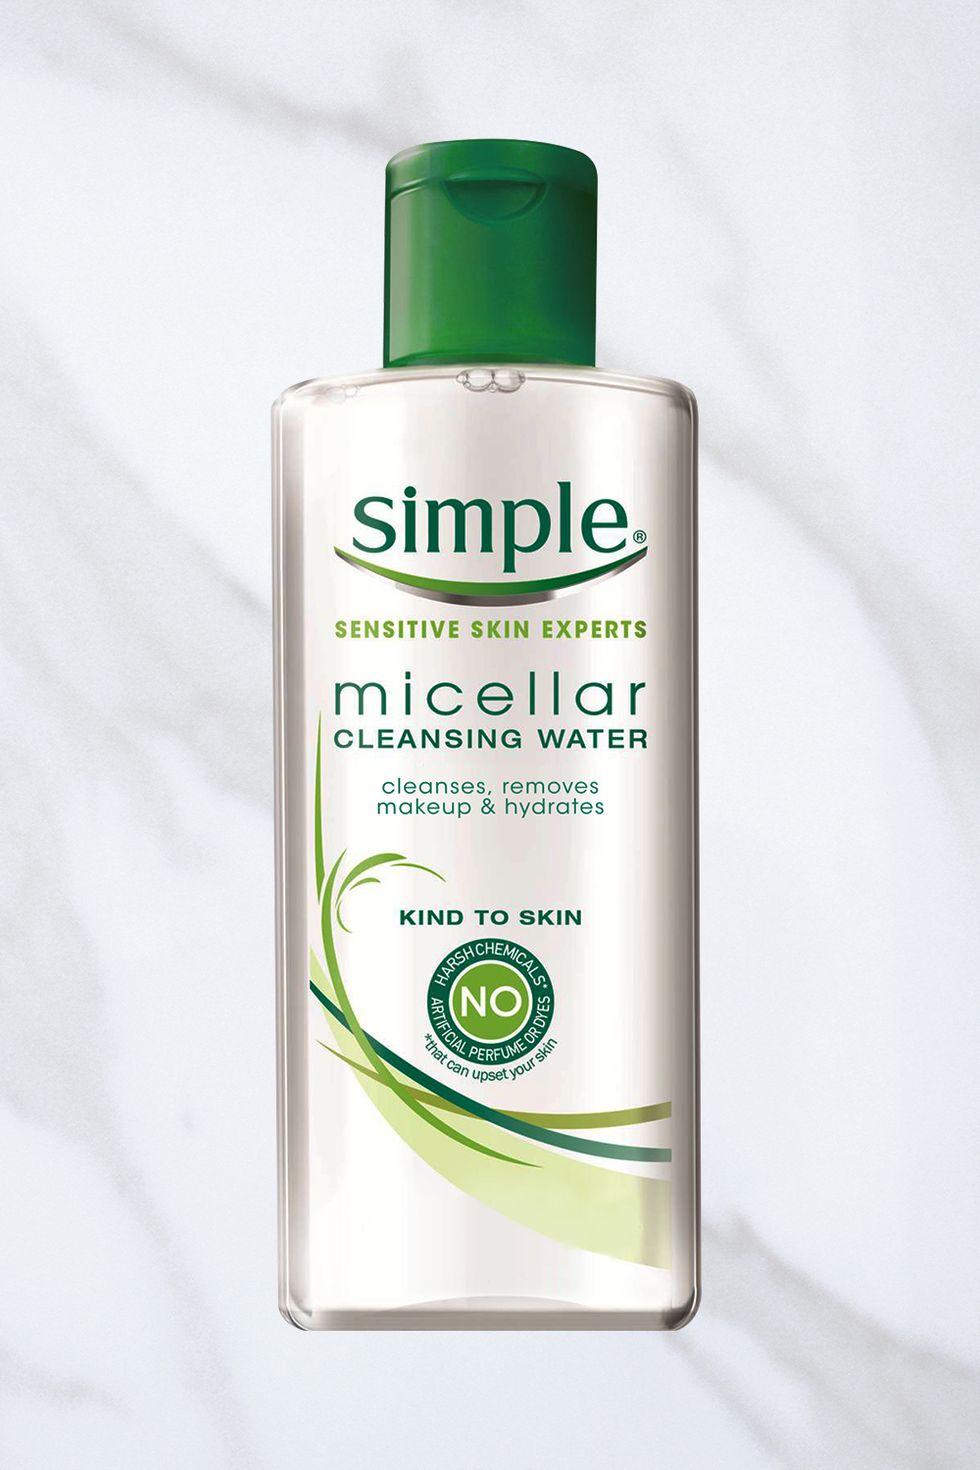 <p>"Nothing is sexier than a fresh, glowing face — it screams confidence," says Gita Bass, Simple Advisory Board Makeup Artist. She recommends <a href="http://www.target.com/p/simple-micellar-cleansing-water-6-7-oz/-/A-16751167#prodSlot=medium_1_1&term=simple+micellar+water" target="_blank">Simple Micellar Water</a>, $6, for an easy, pre-date (or post-sleepover) wash. "It thoroughly cleanses the skin, leaving it soft and instantly hydrated."</p>